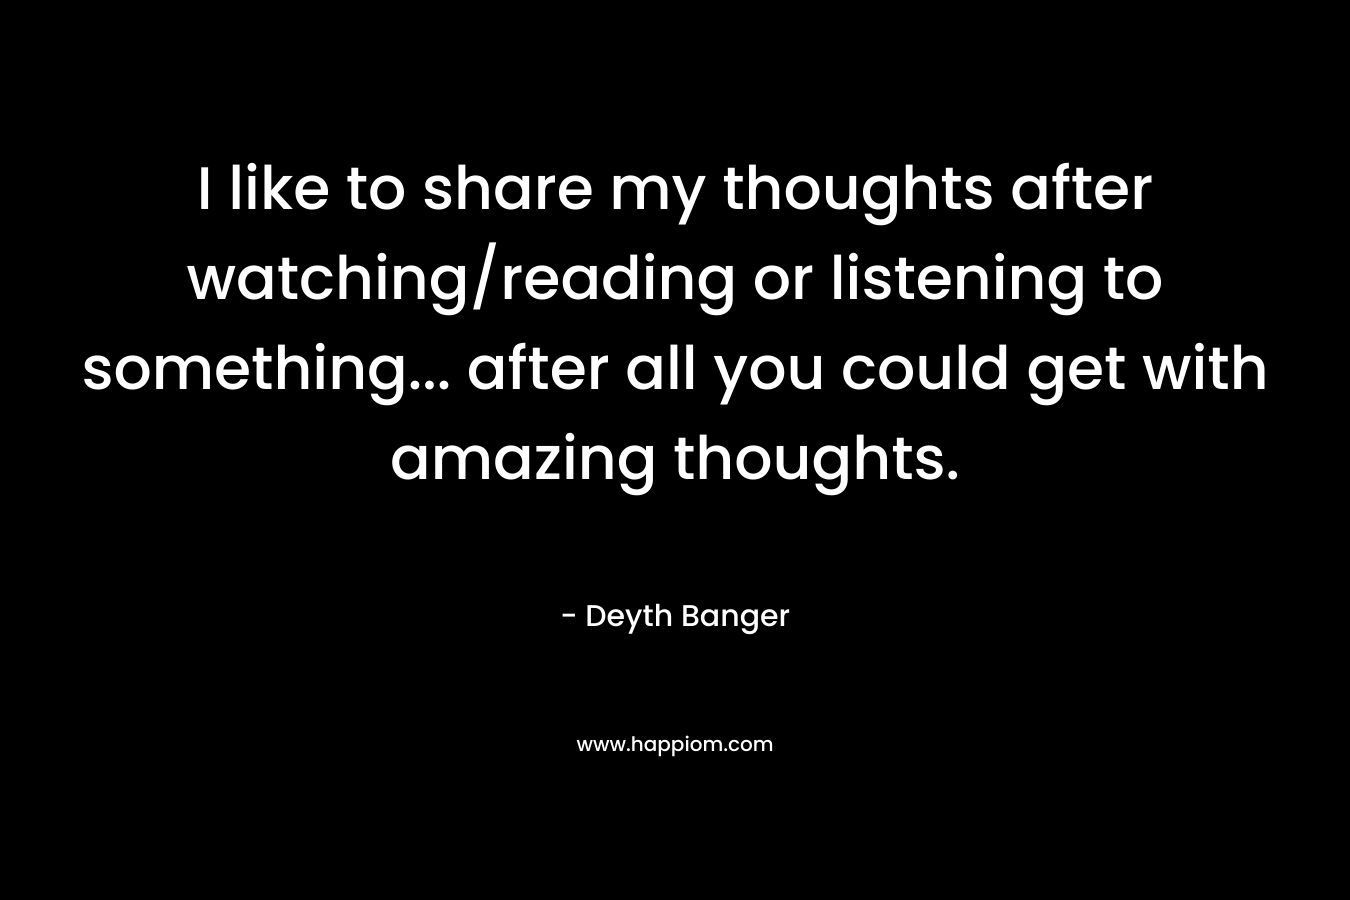 I like to share my thoughts after watching/reading or listening to something… after all you could get with amazing thoughts. – Deyth Banger